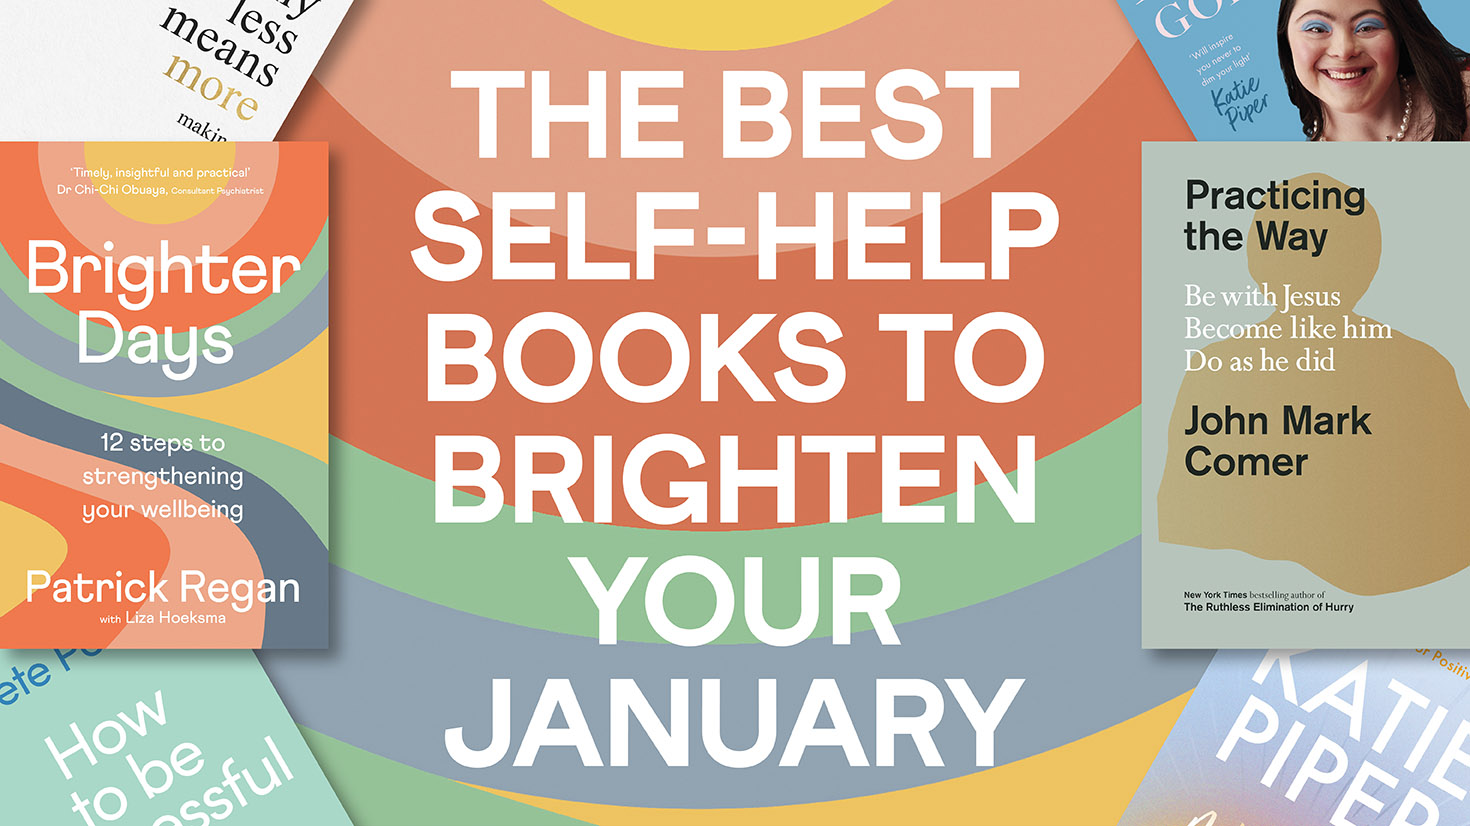 The Best Self-Help Books to Brighten Your January